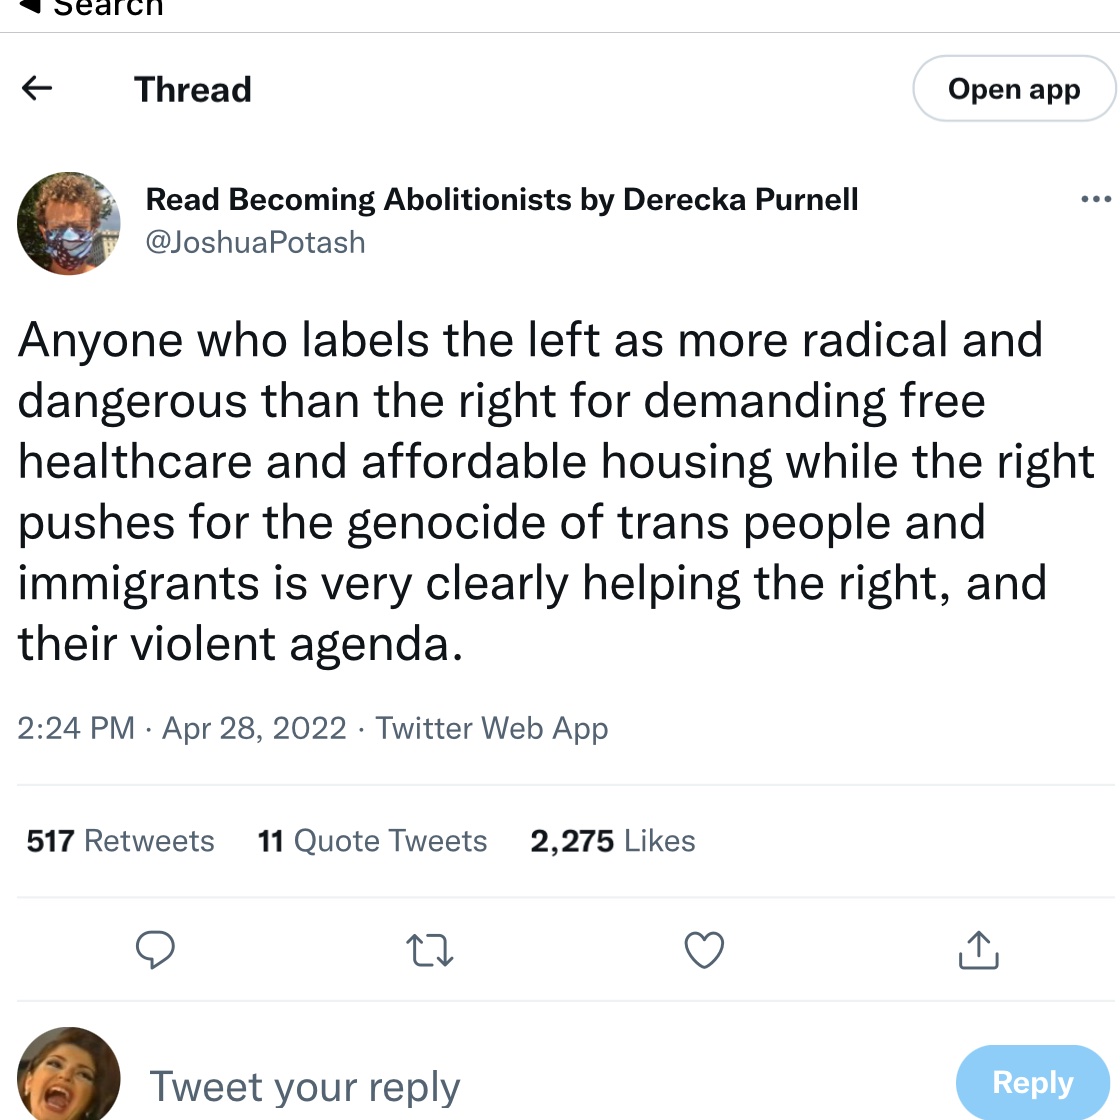 I am begging these people to tell me WHAT GENOCIDE?!